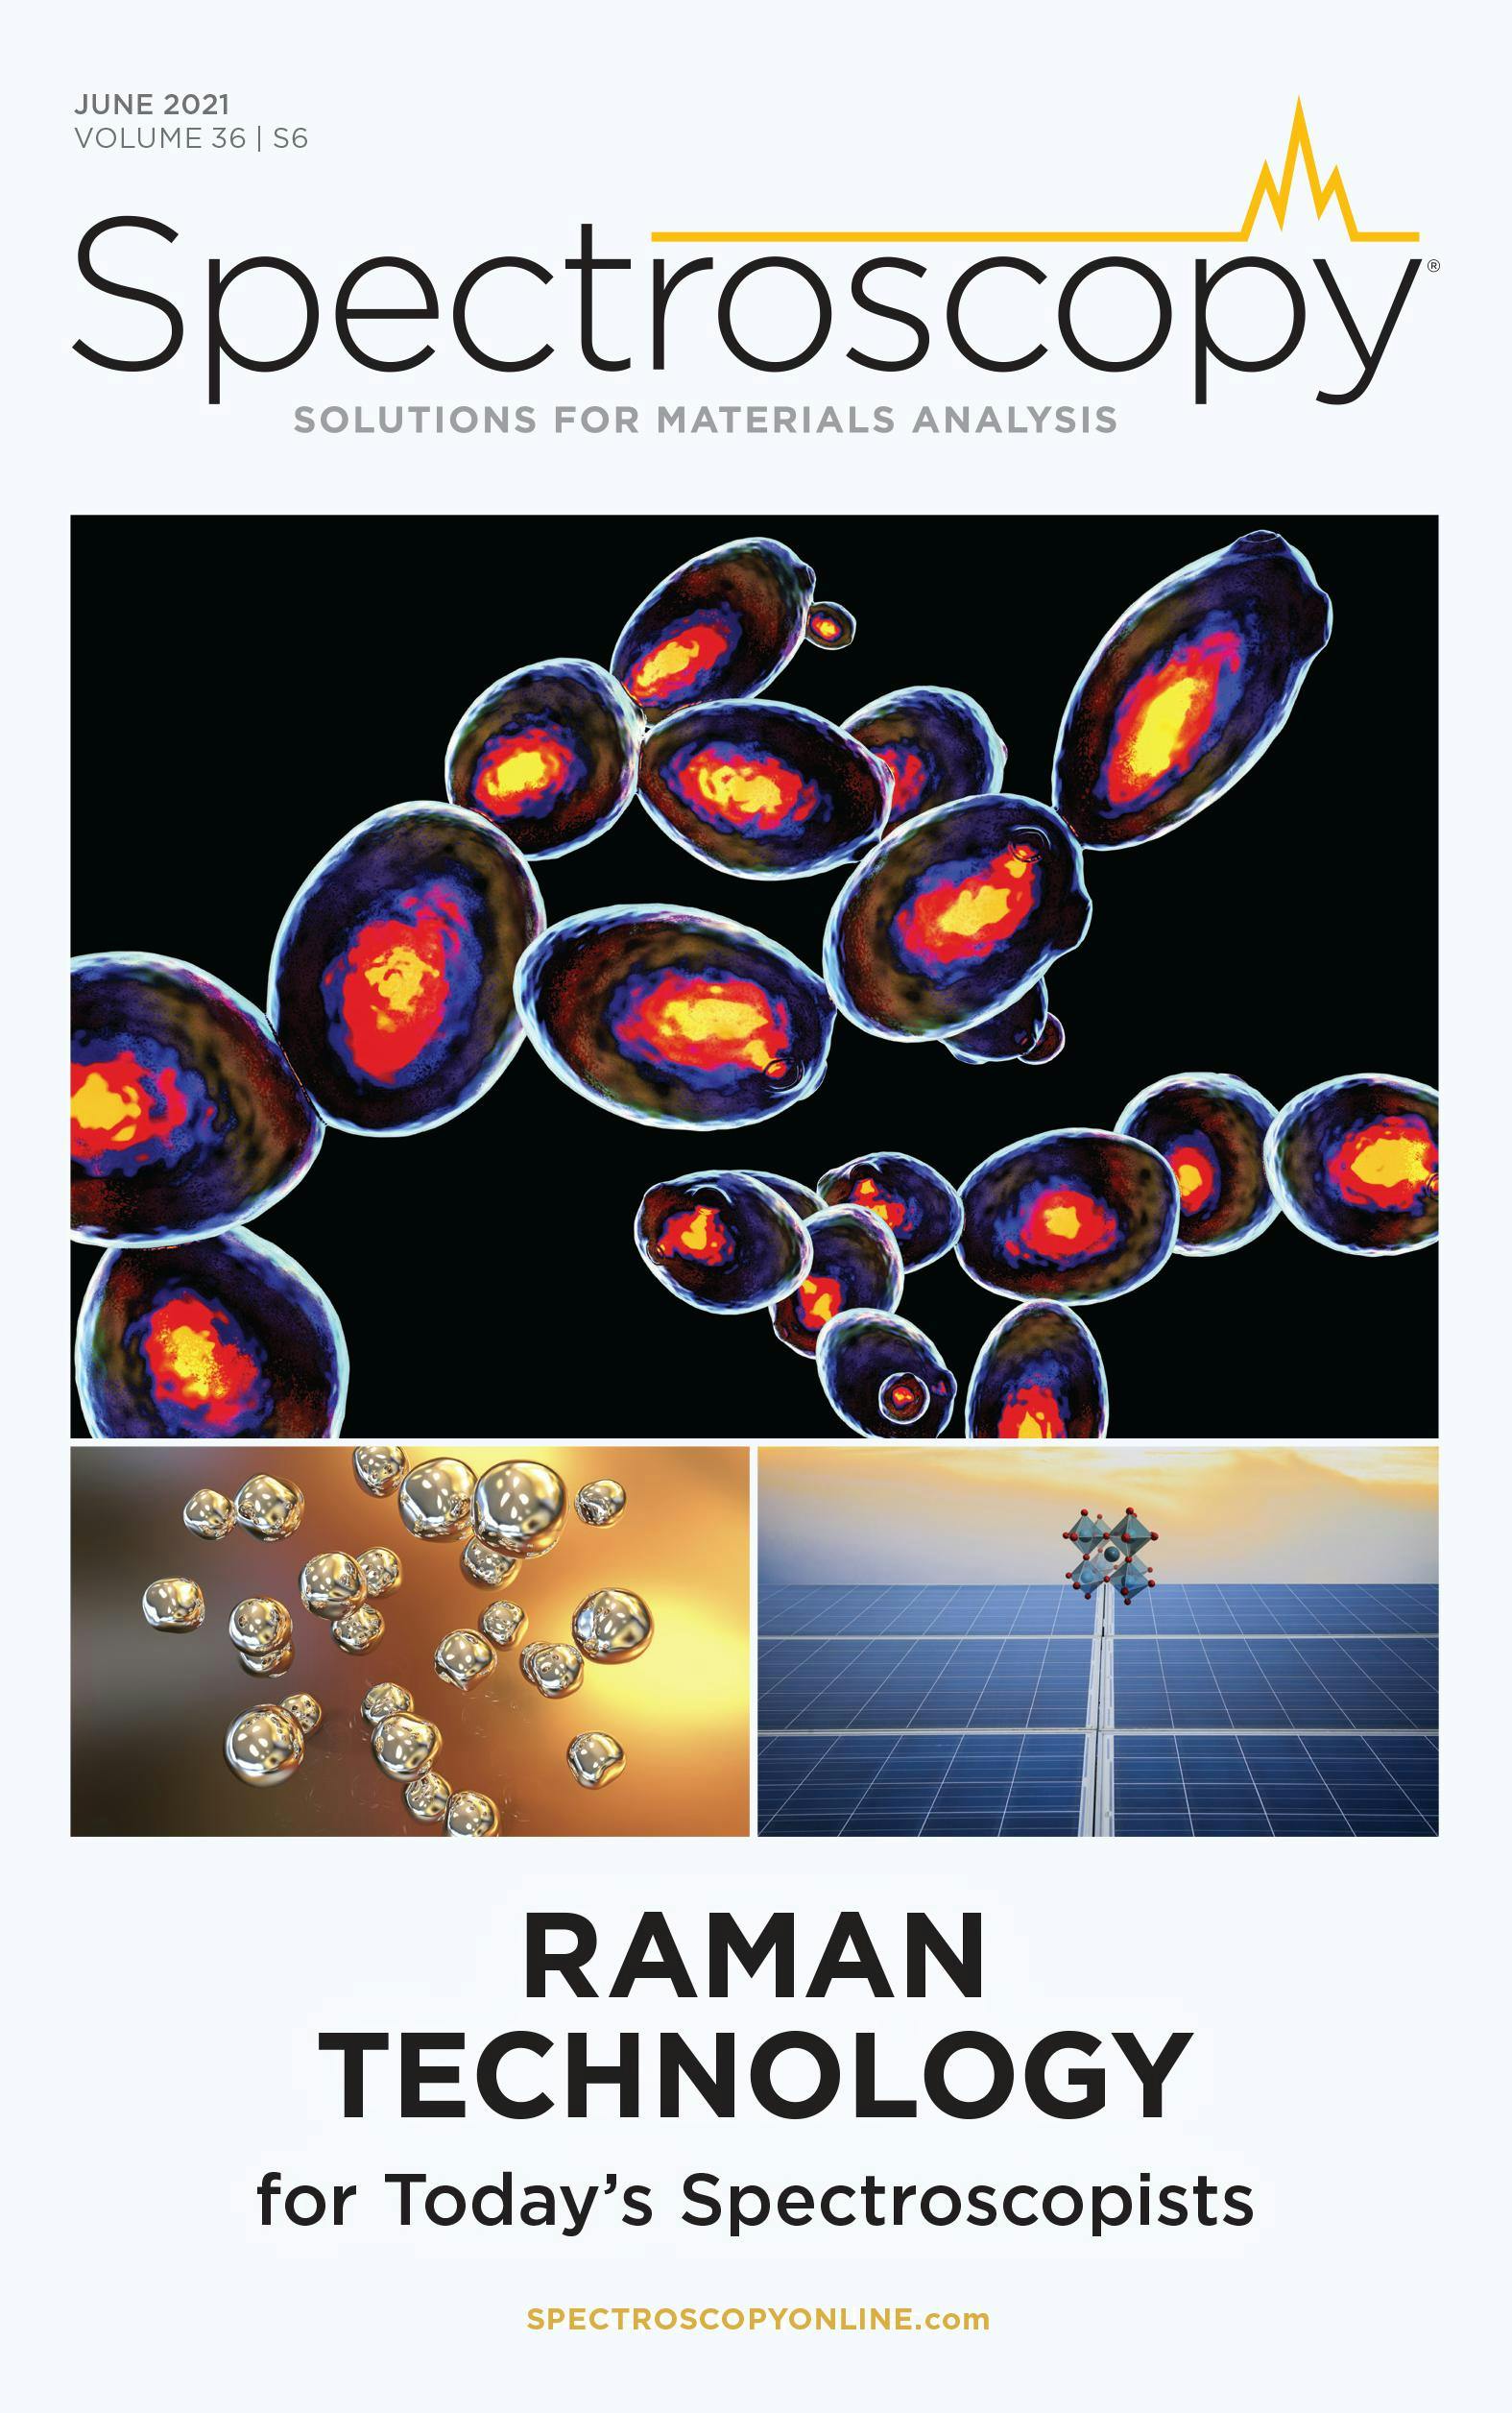 Raman Technology for Today's Spectroscopists